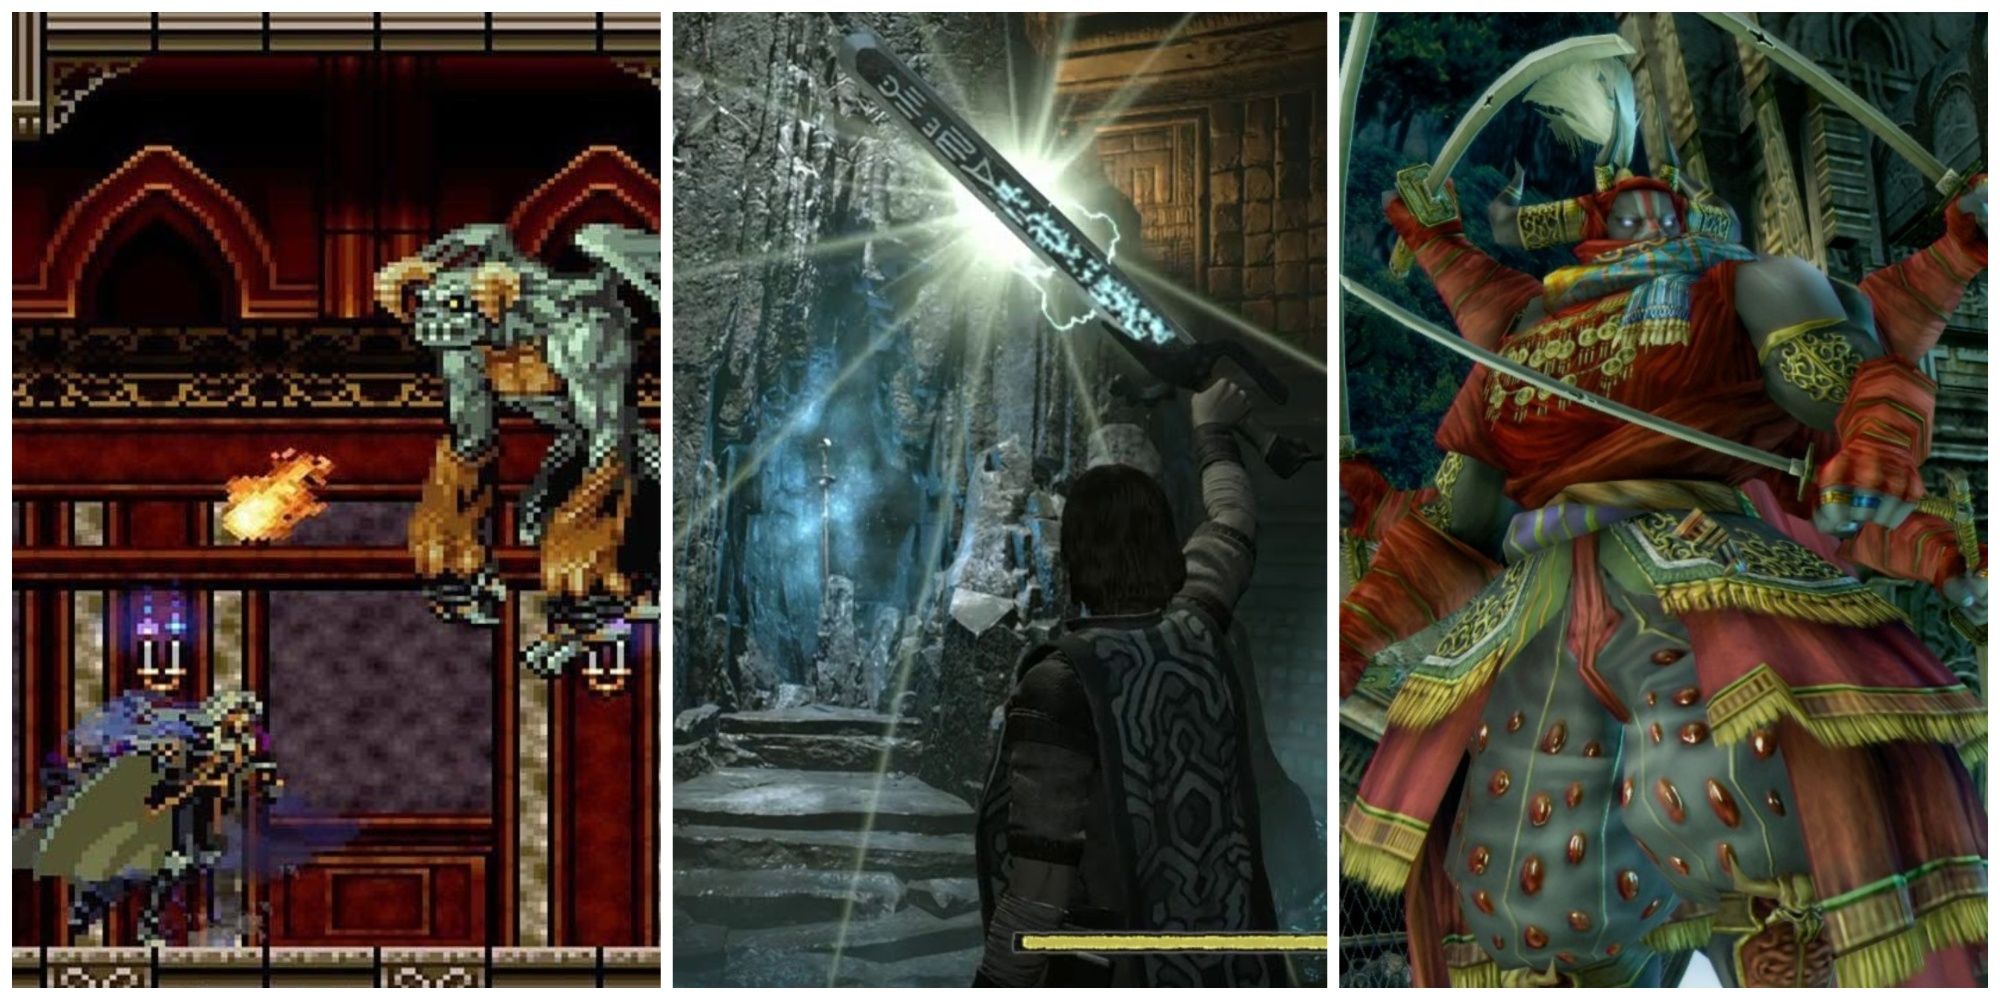 Castlevania: Symphony of the Night, Shadow of the Colossus, & Gilgamesh